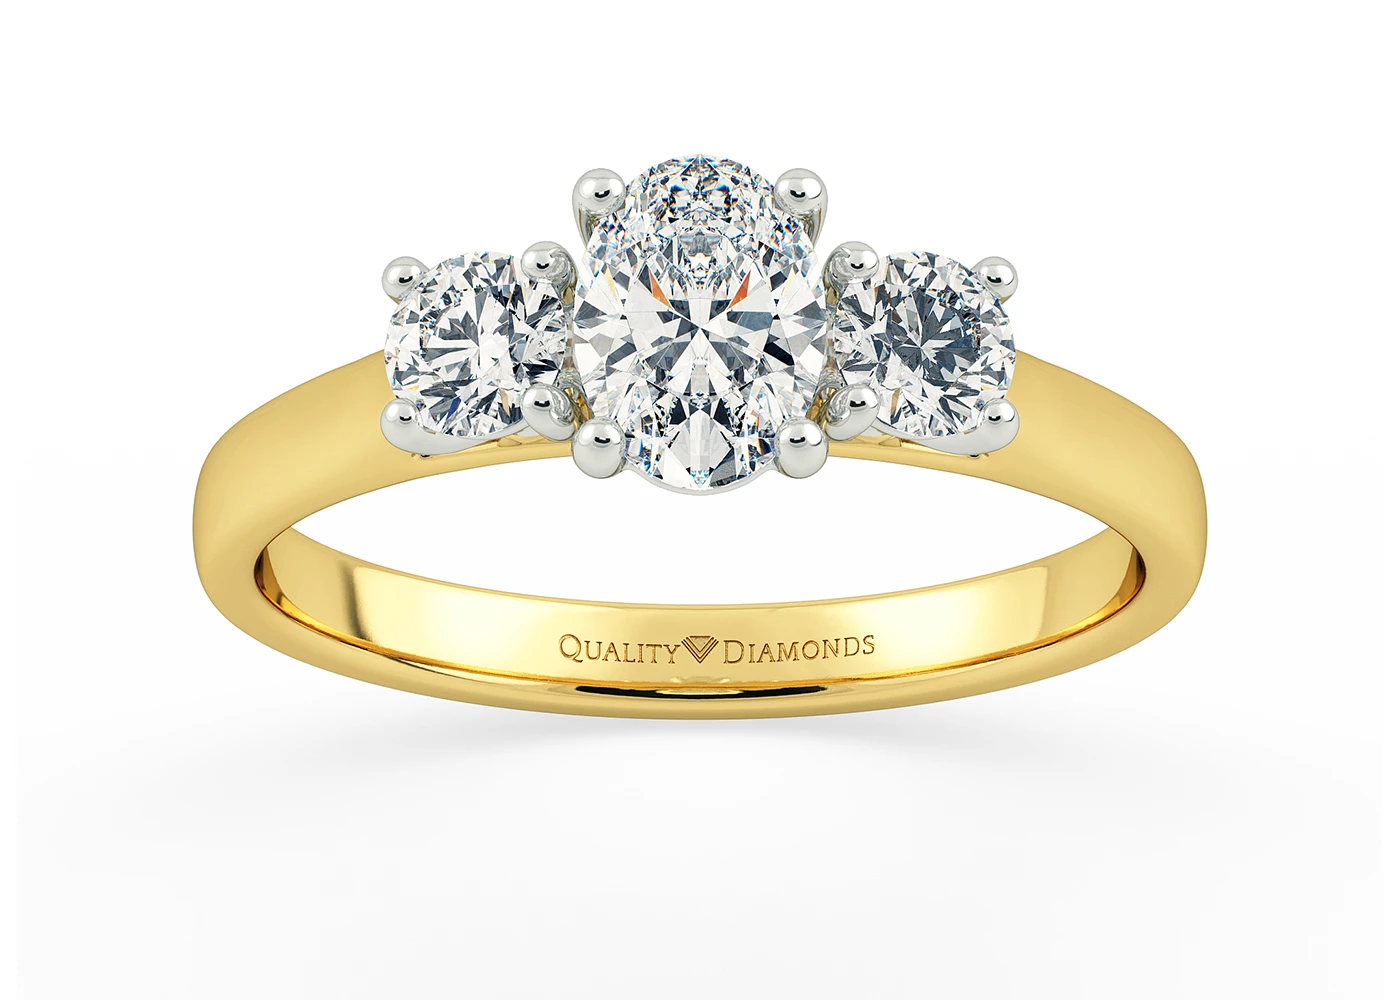 Oval Trilogy Mabelle Diamond Ring in 9K Yellow Gold